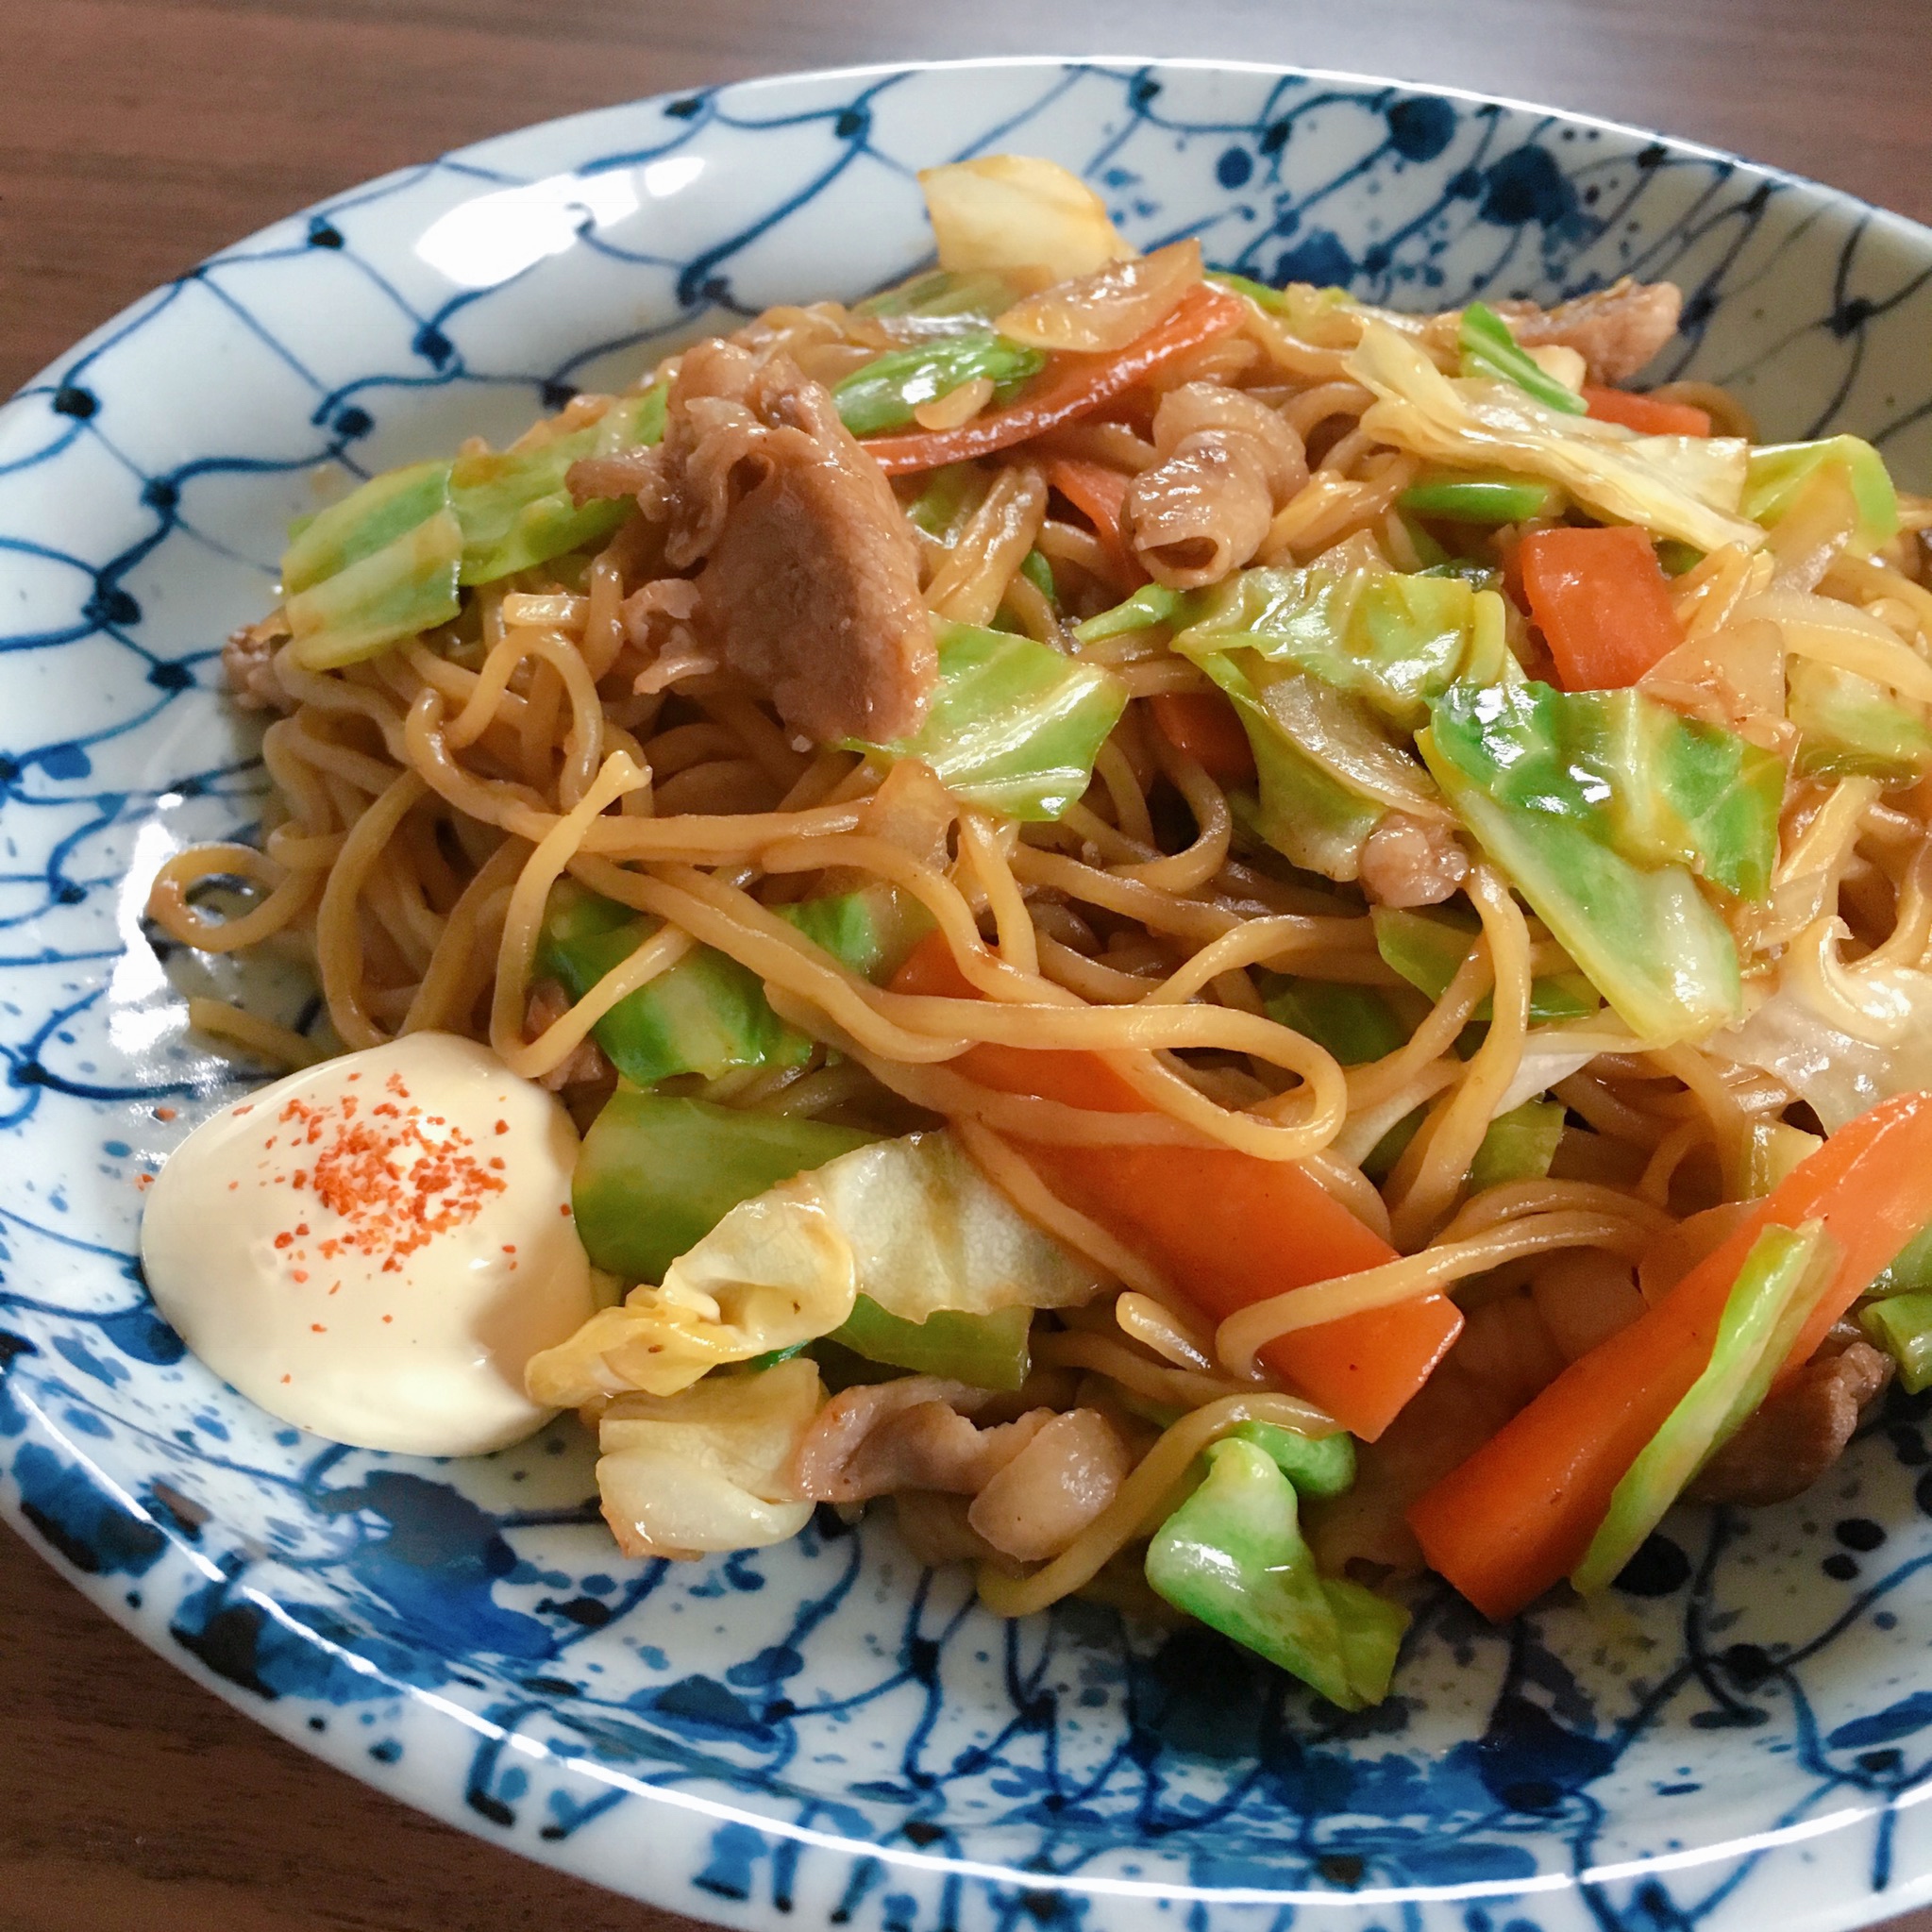 Vegetables, pork, and Chinese noodles are stir-fried and mixed with a fragrant sauce.